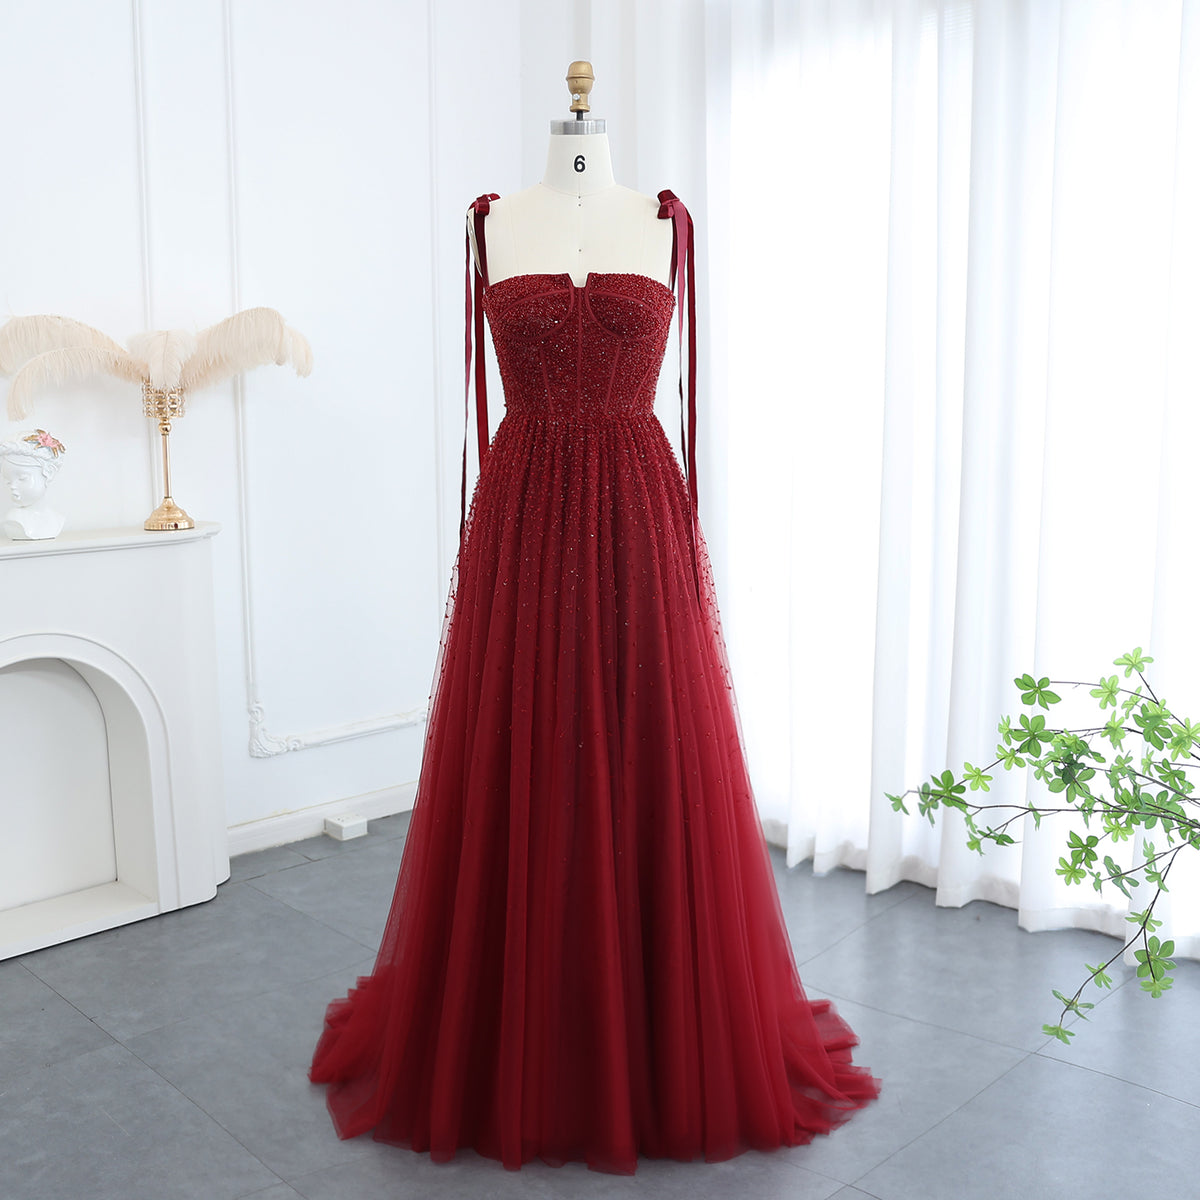 Sharon Said Luxury Beaded Wine Red Dubai Evening Dresses with Straps Elegant Women Arabic Wedding Party Gown SS263